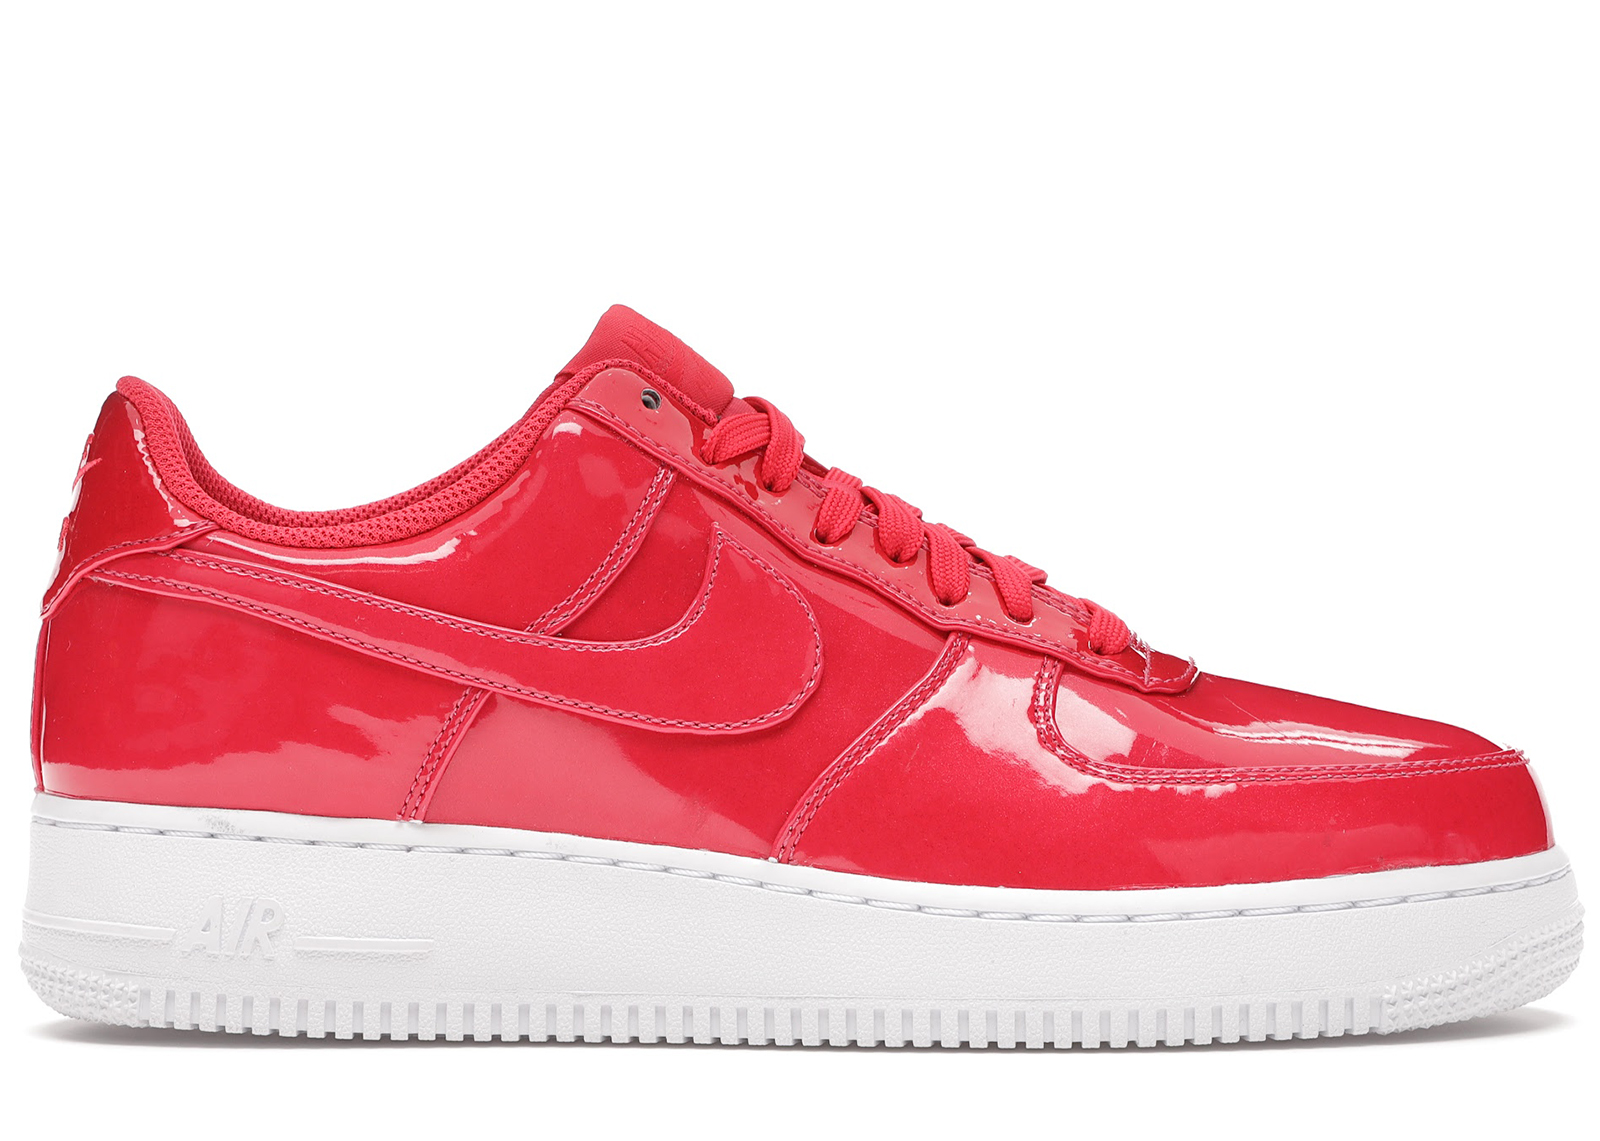 Nike Air Force 1 Ultraviolet Siren Red | kensysgas.com